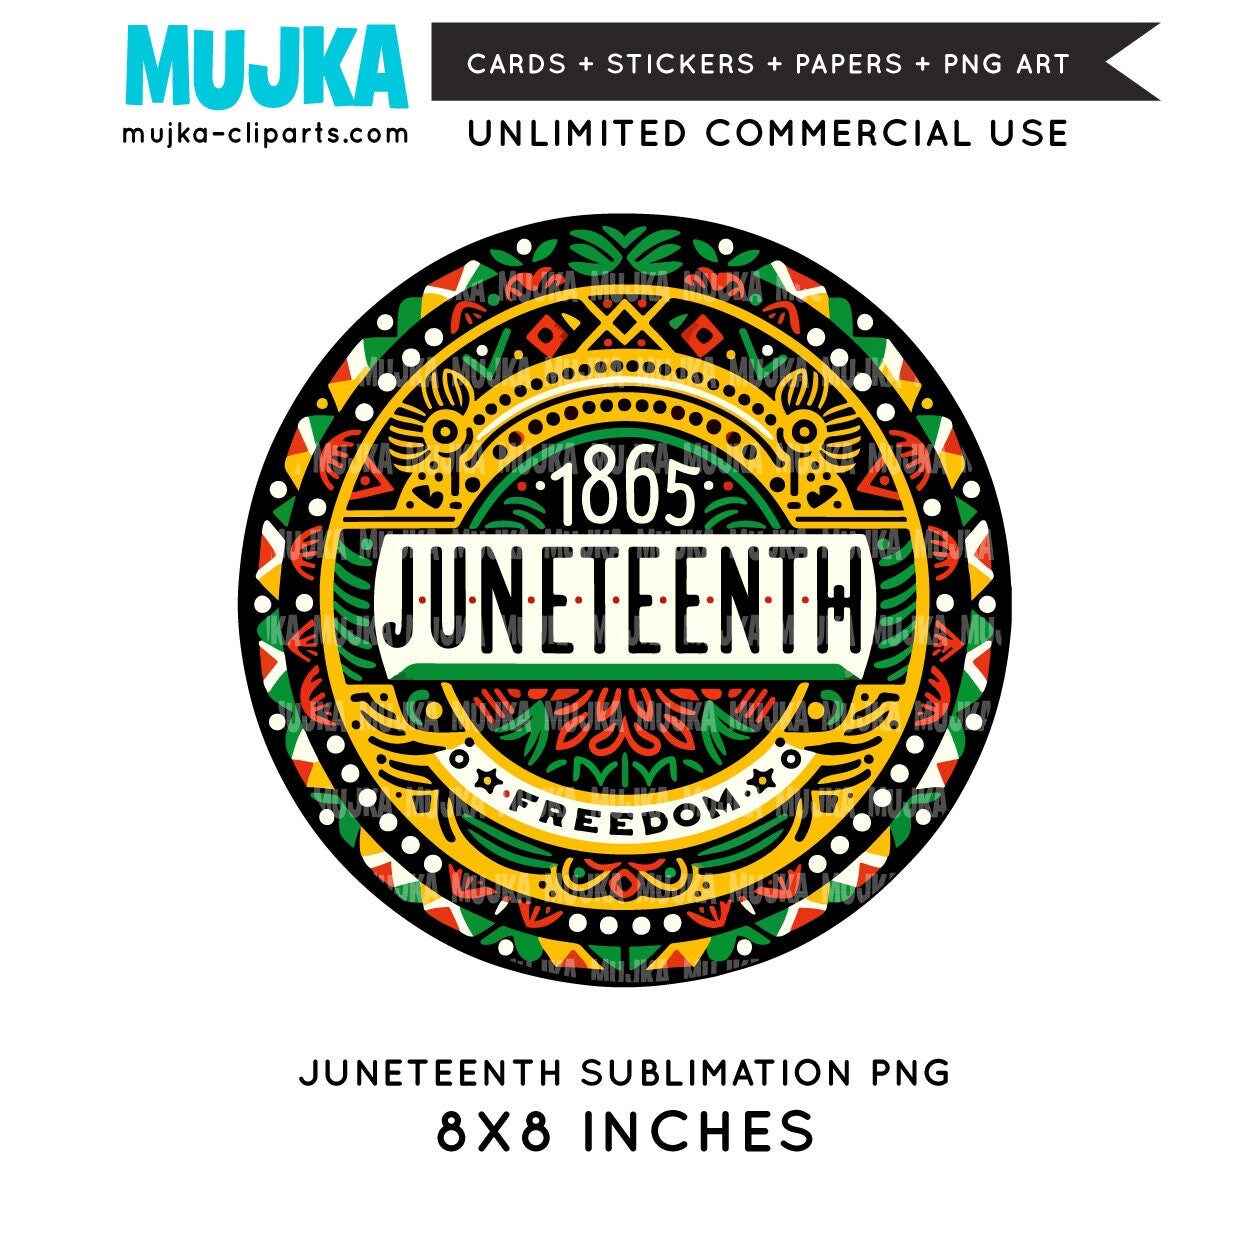 Juneteenth PNG, Juneteenth clipart, Juneteenth sublimation designs download, 1865 png, Black History Month image, African American printable